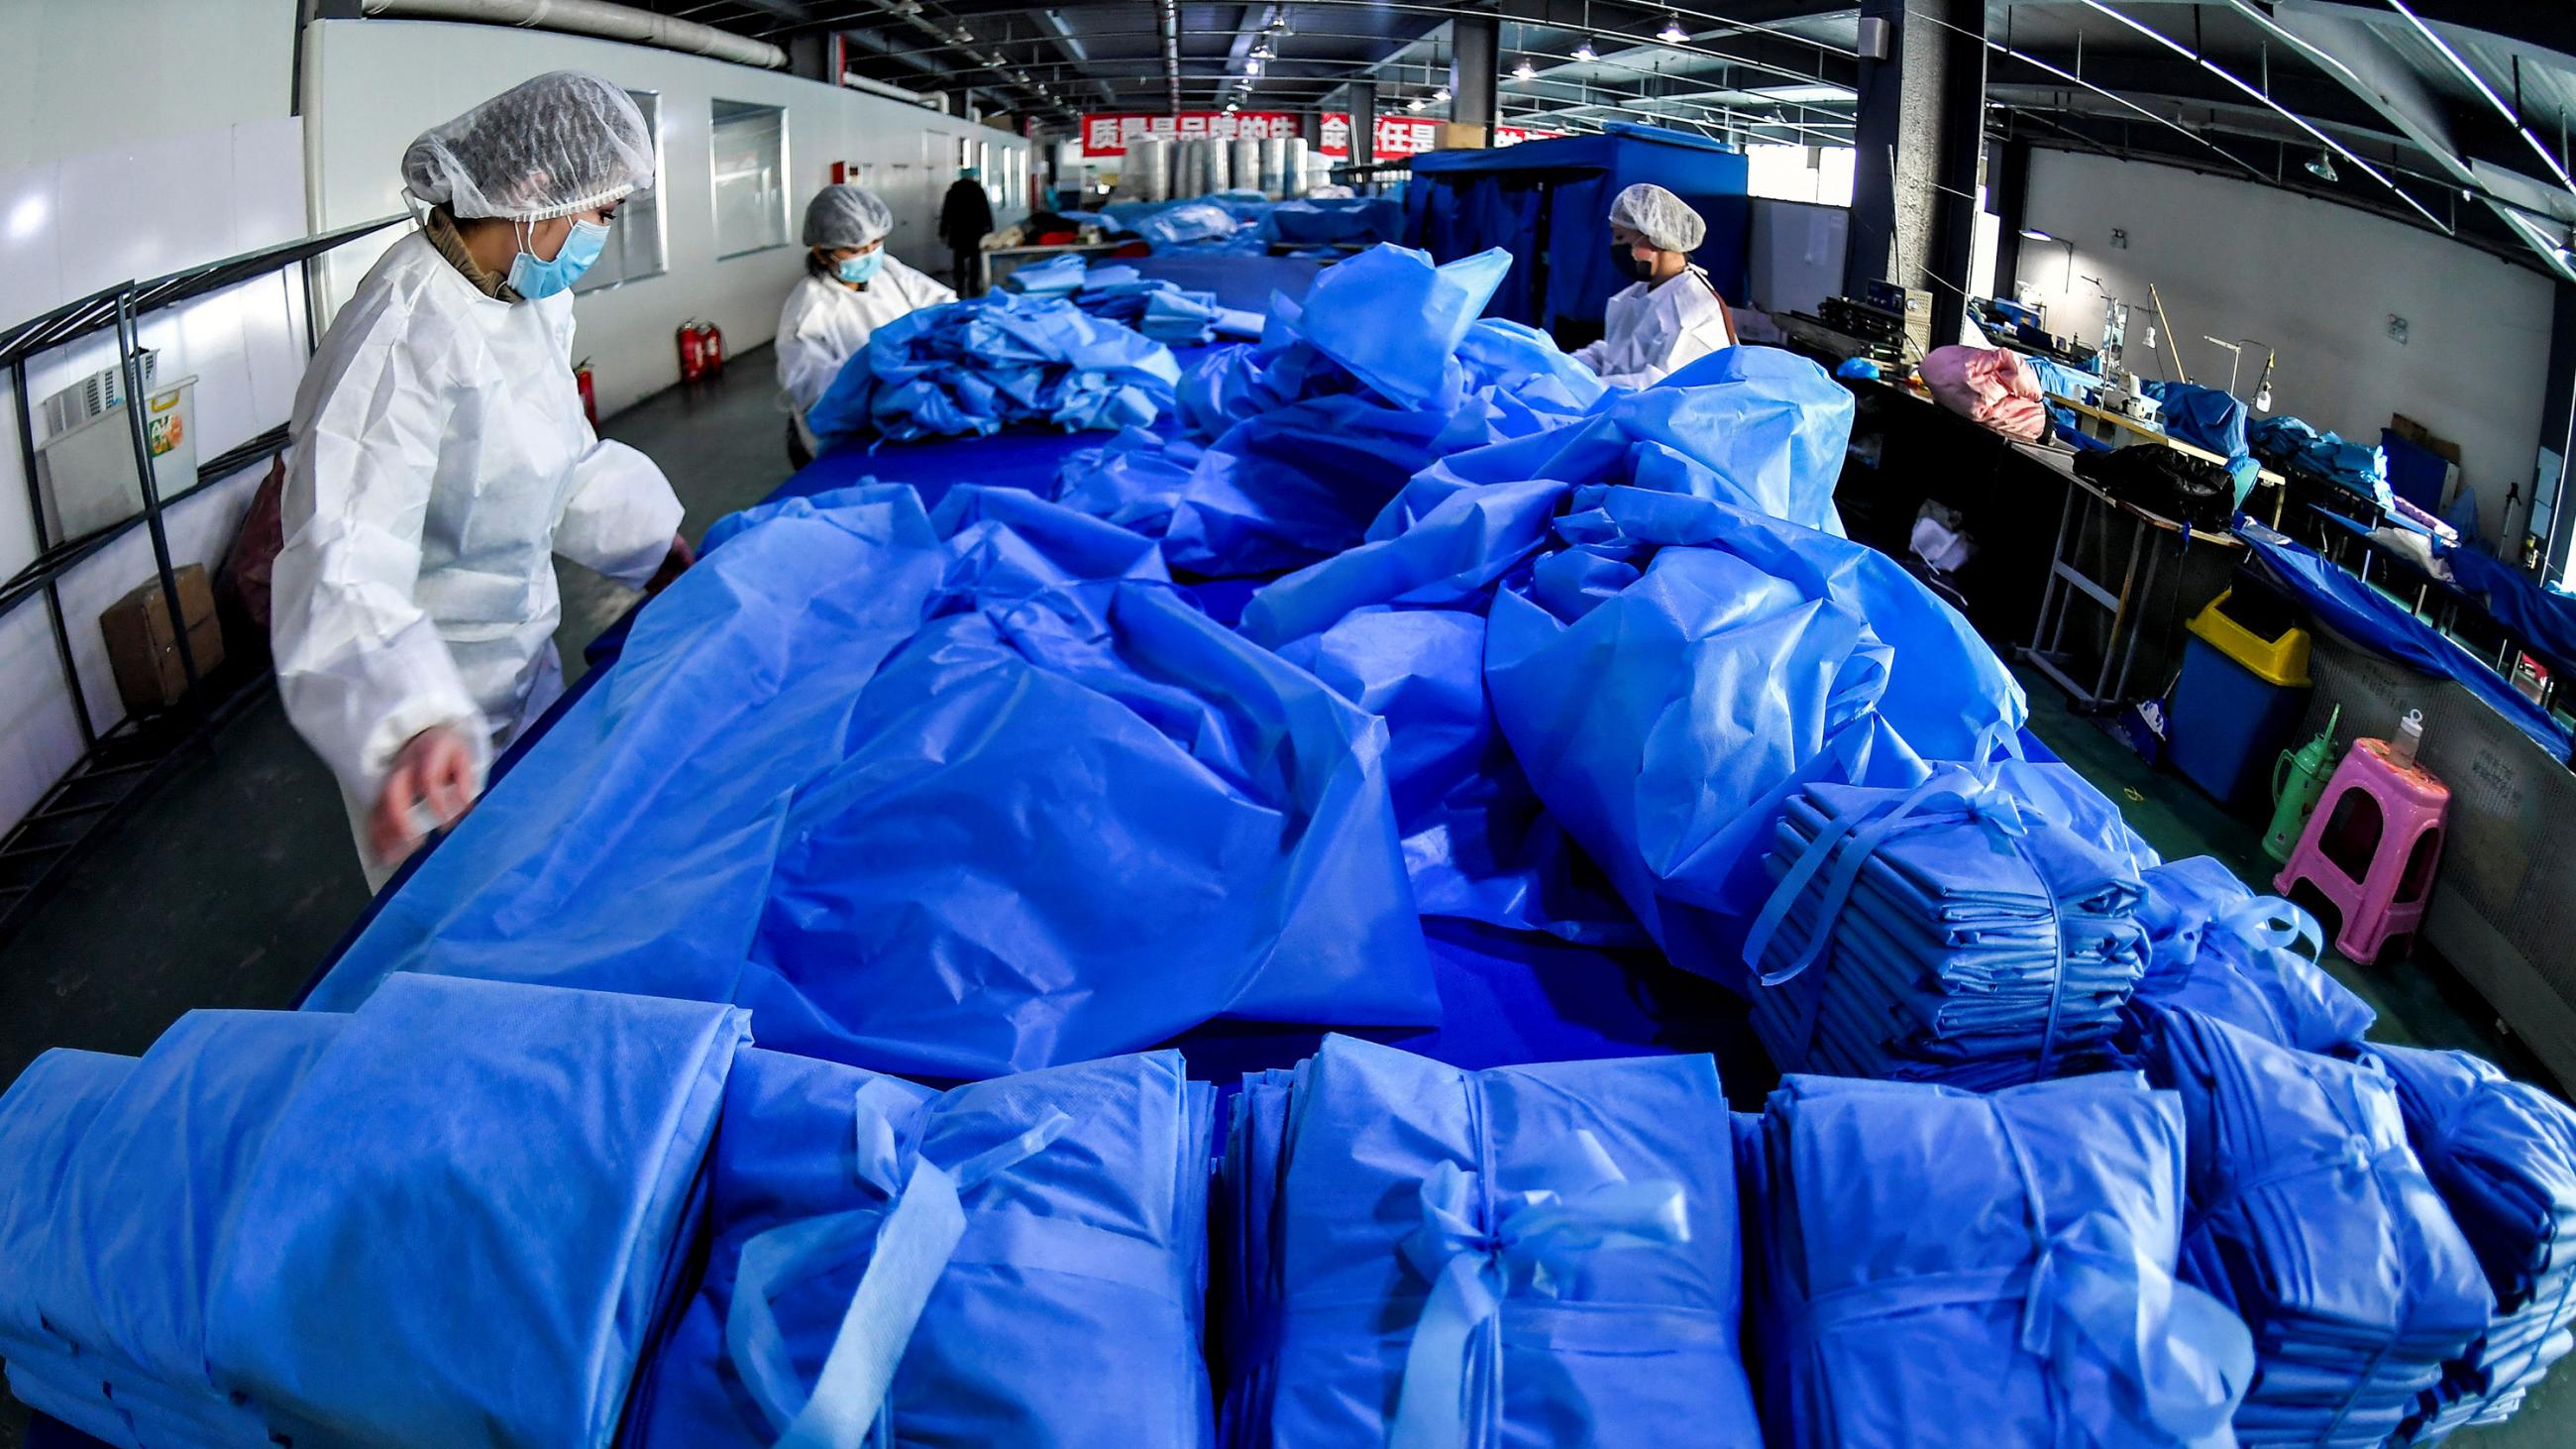 Picture shows workers wearing protective gear standing among piles of folded hospital gowns and other protective equipment.